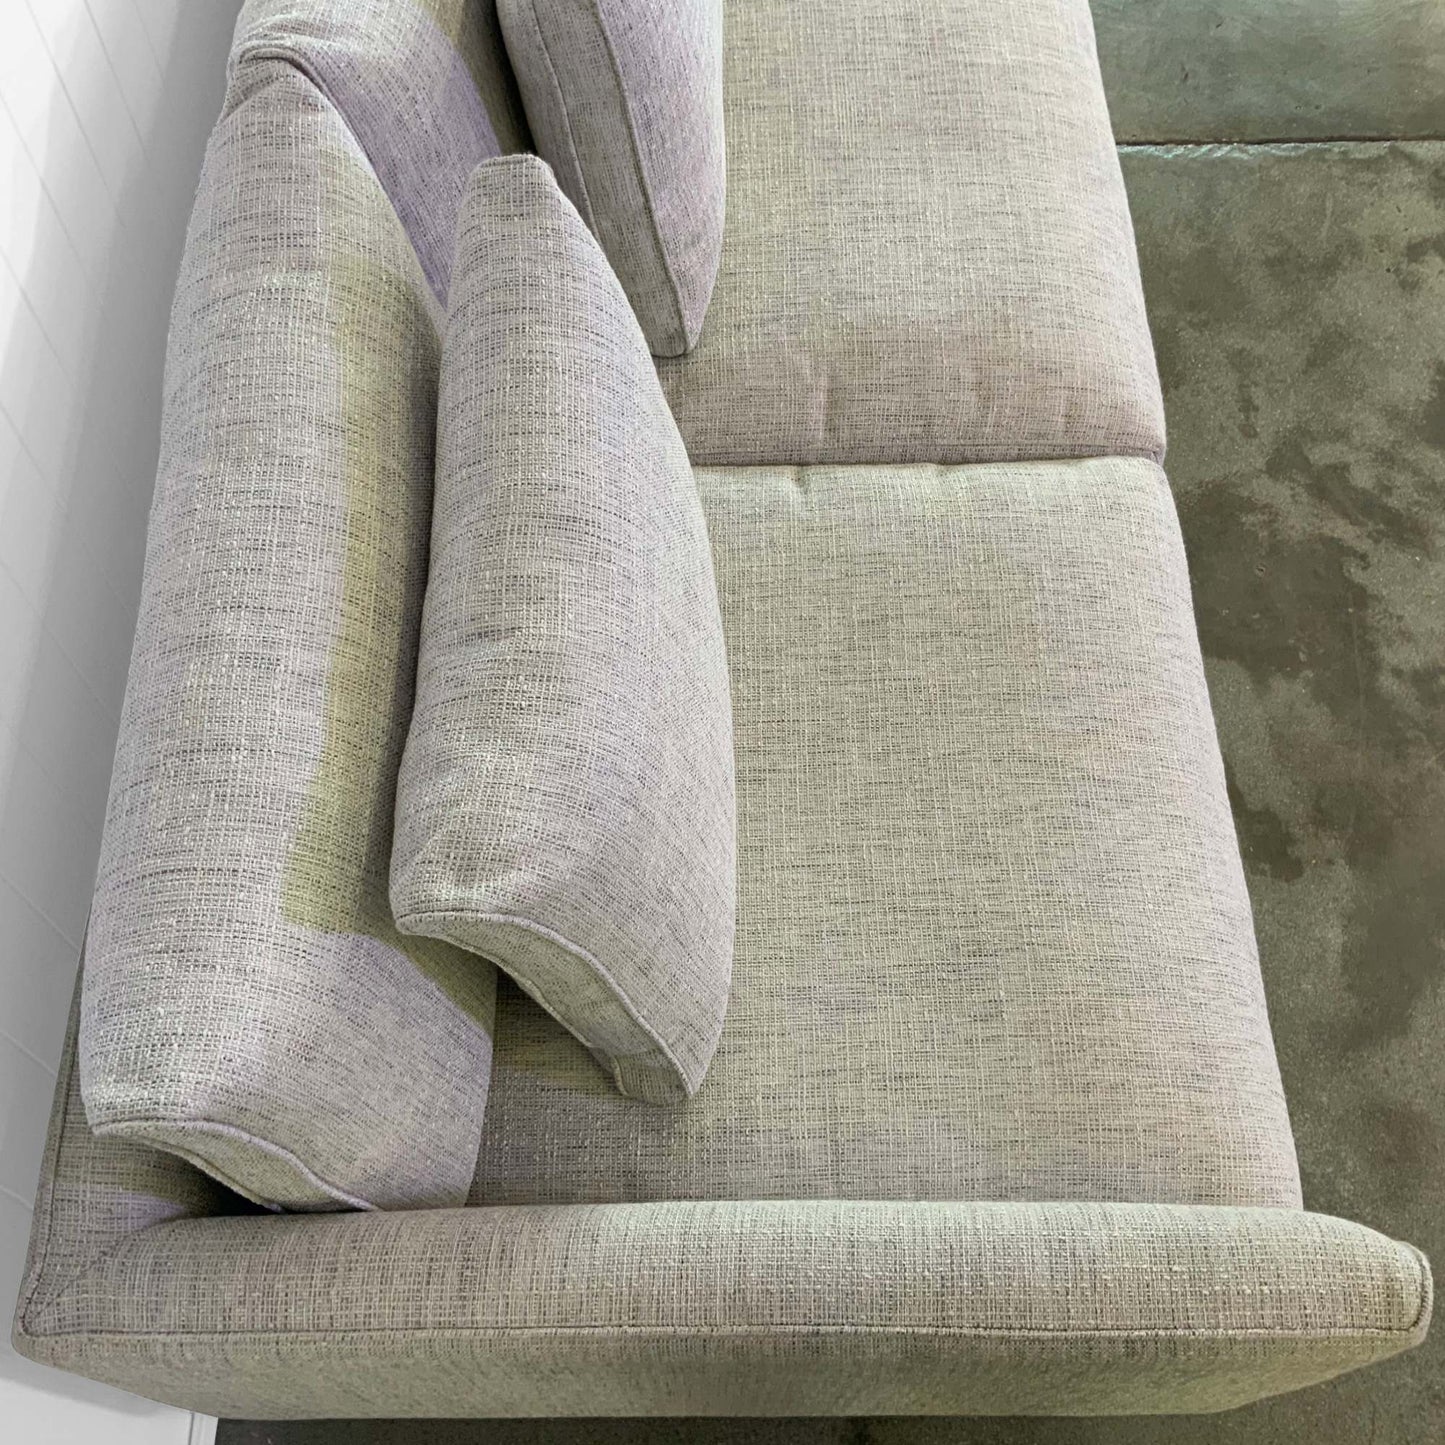 Oslo Sofa | Value Range Fabrics Multiple Sizes And Options Available Made To Order In Wa